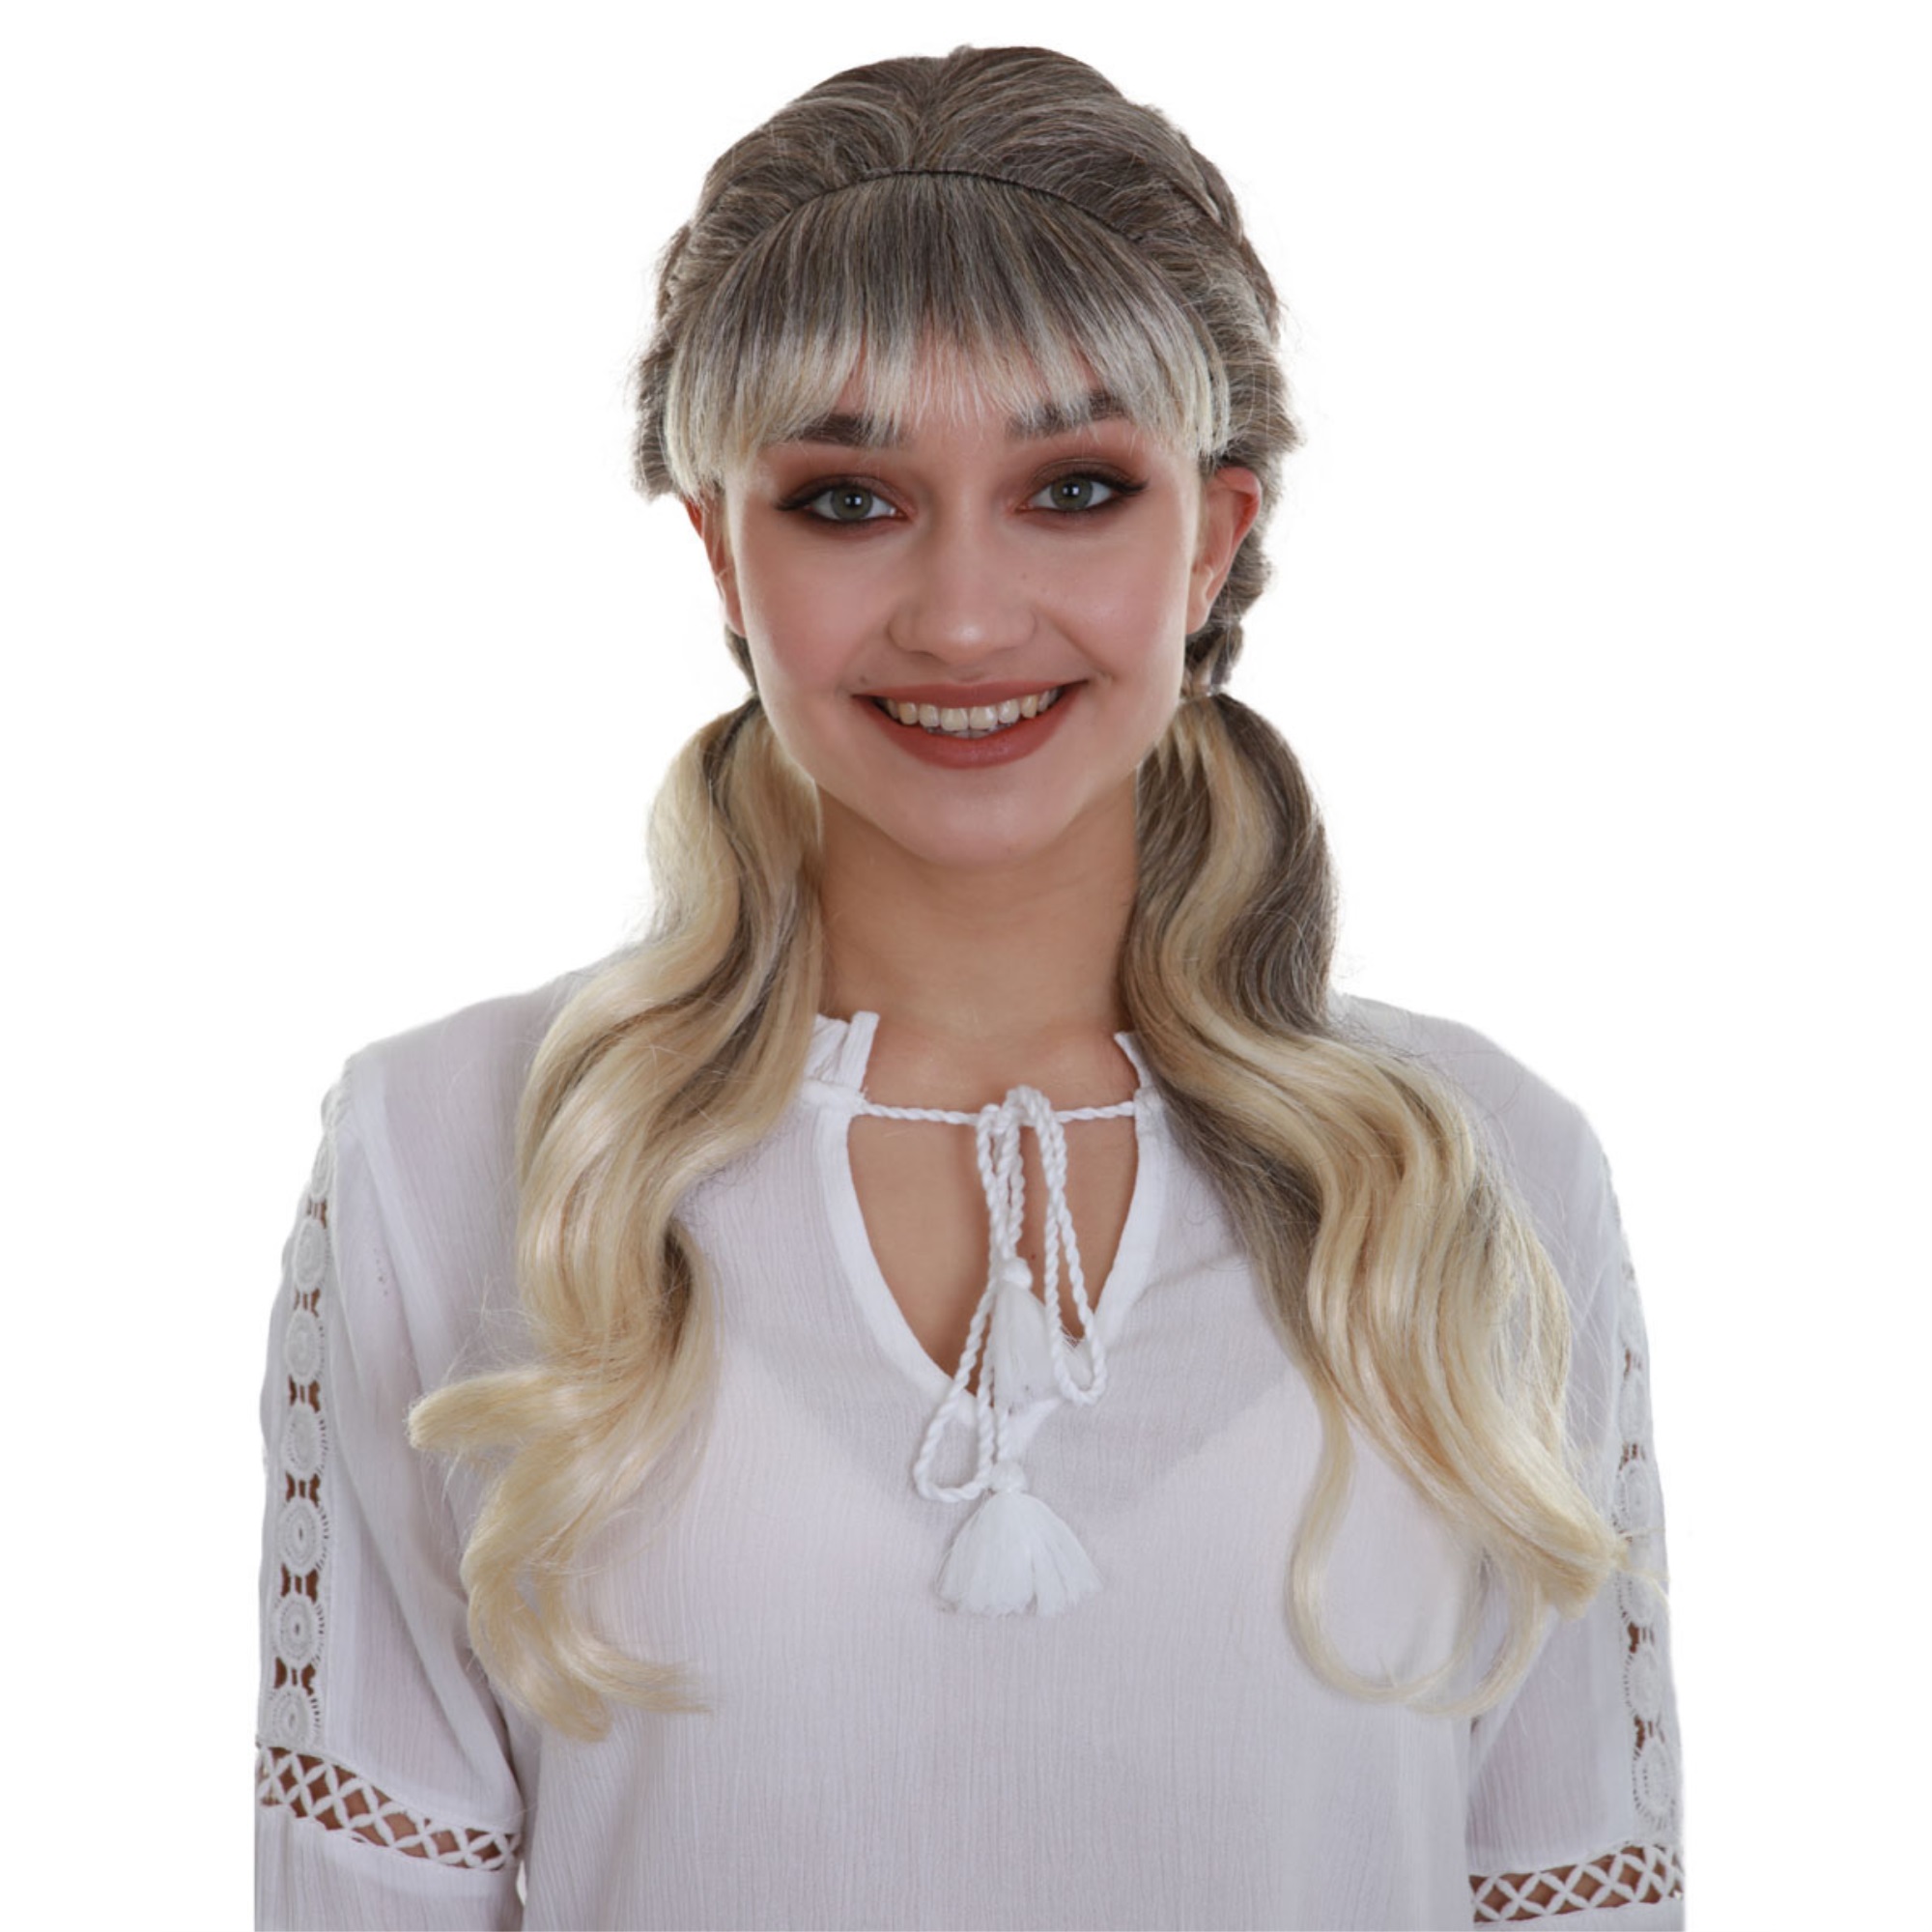 Banana Costumes HPO Adult Womens Blonde Color Straight Medium Length Pigtails Trendy Sassy School Girl Wig